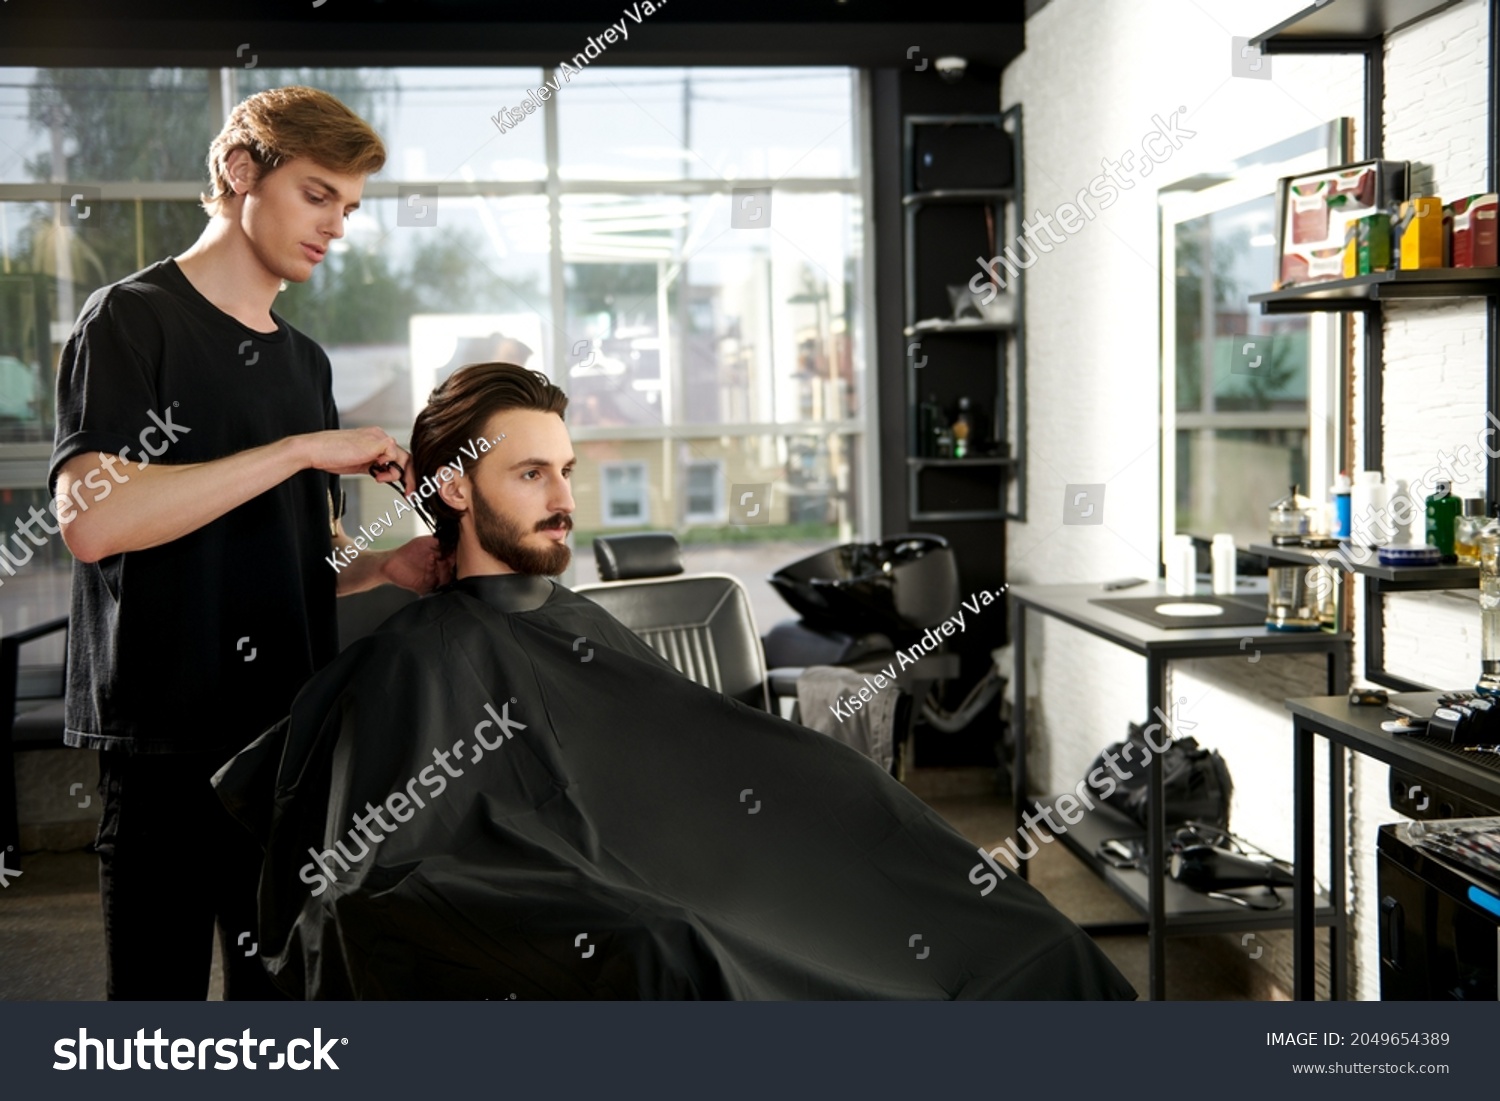 Hairstylist serving a client at a barbershop. Handsome brunet man visiting a hairstylist. Modern hairdressing saloon.  #2049654389